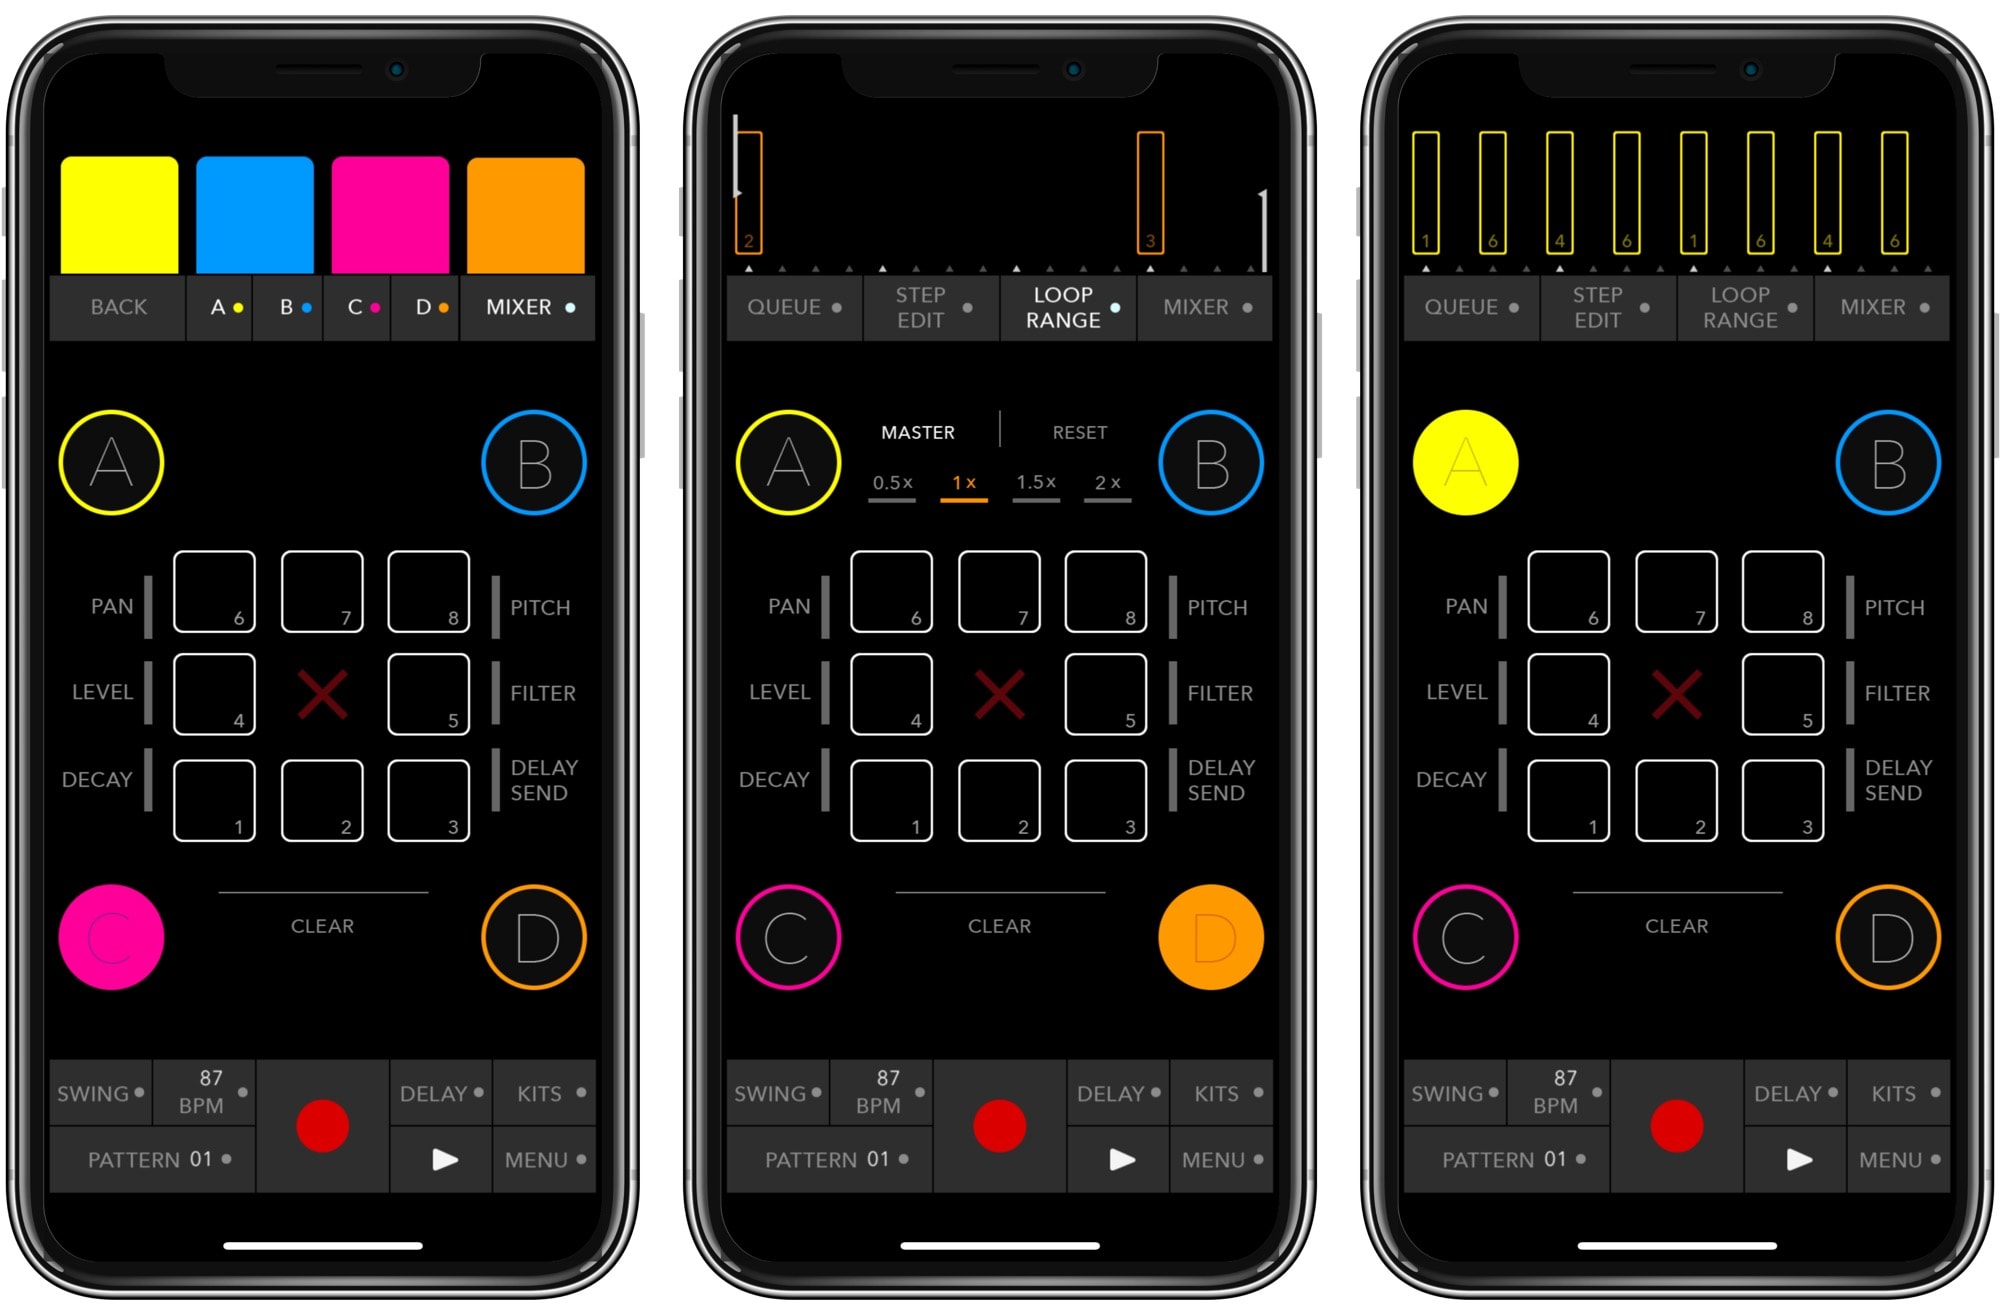 Triqtraq jam sequencer is simple yet deep.